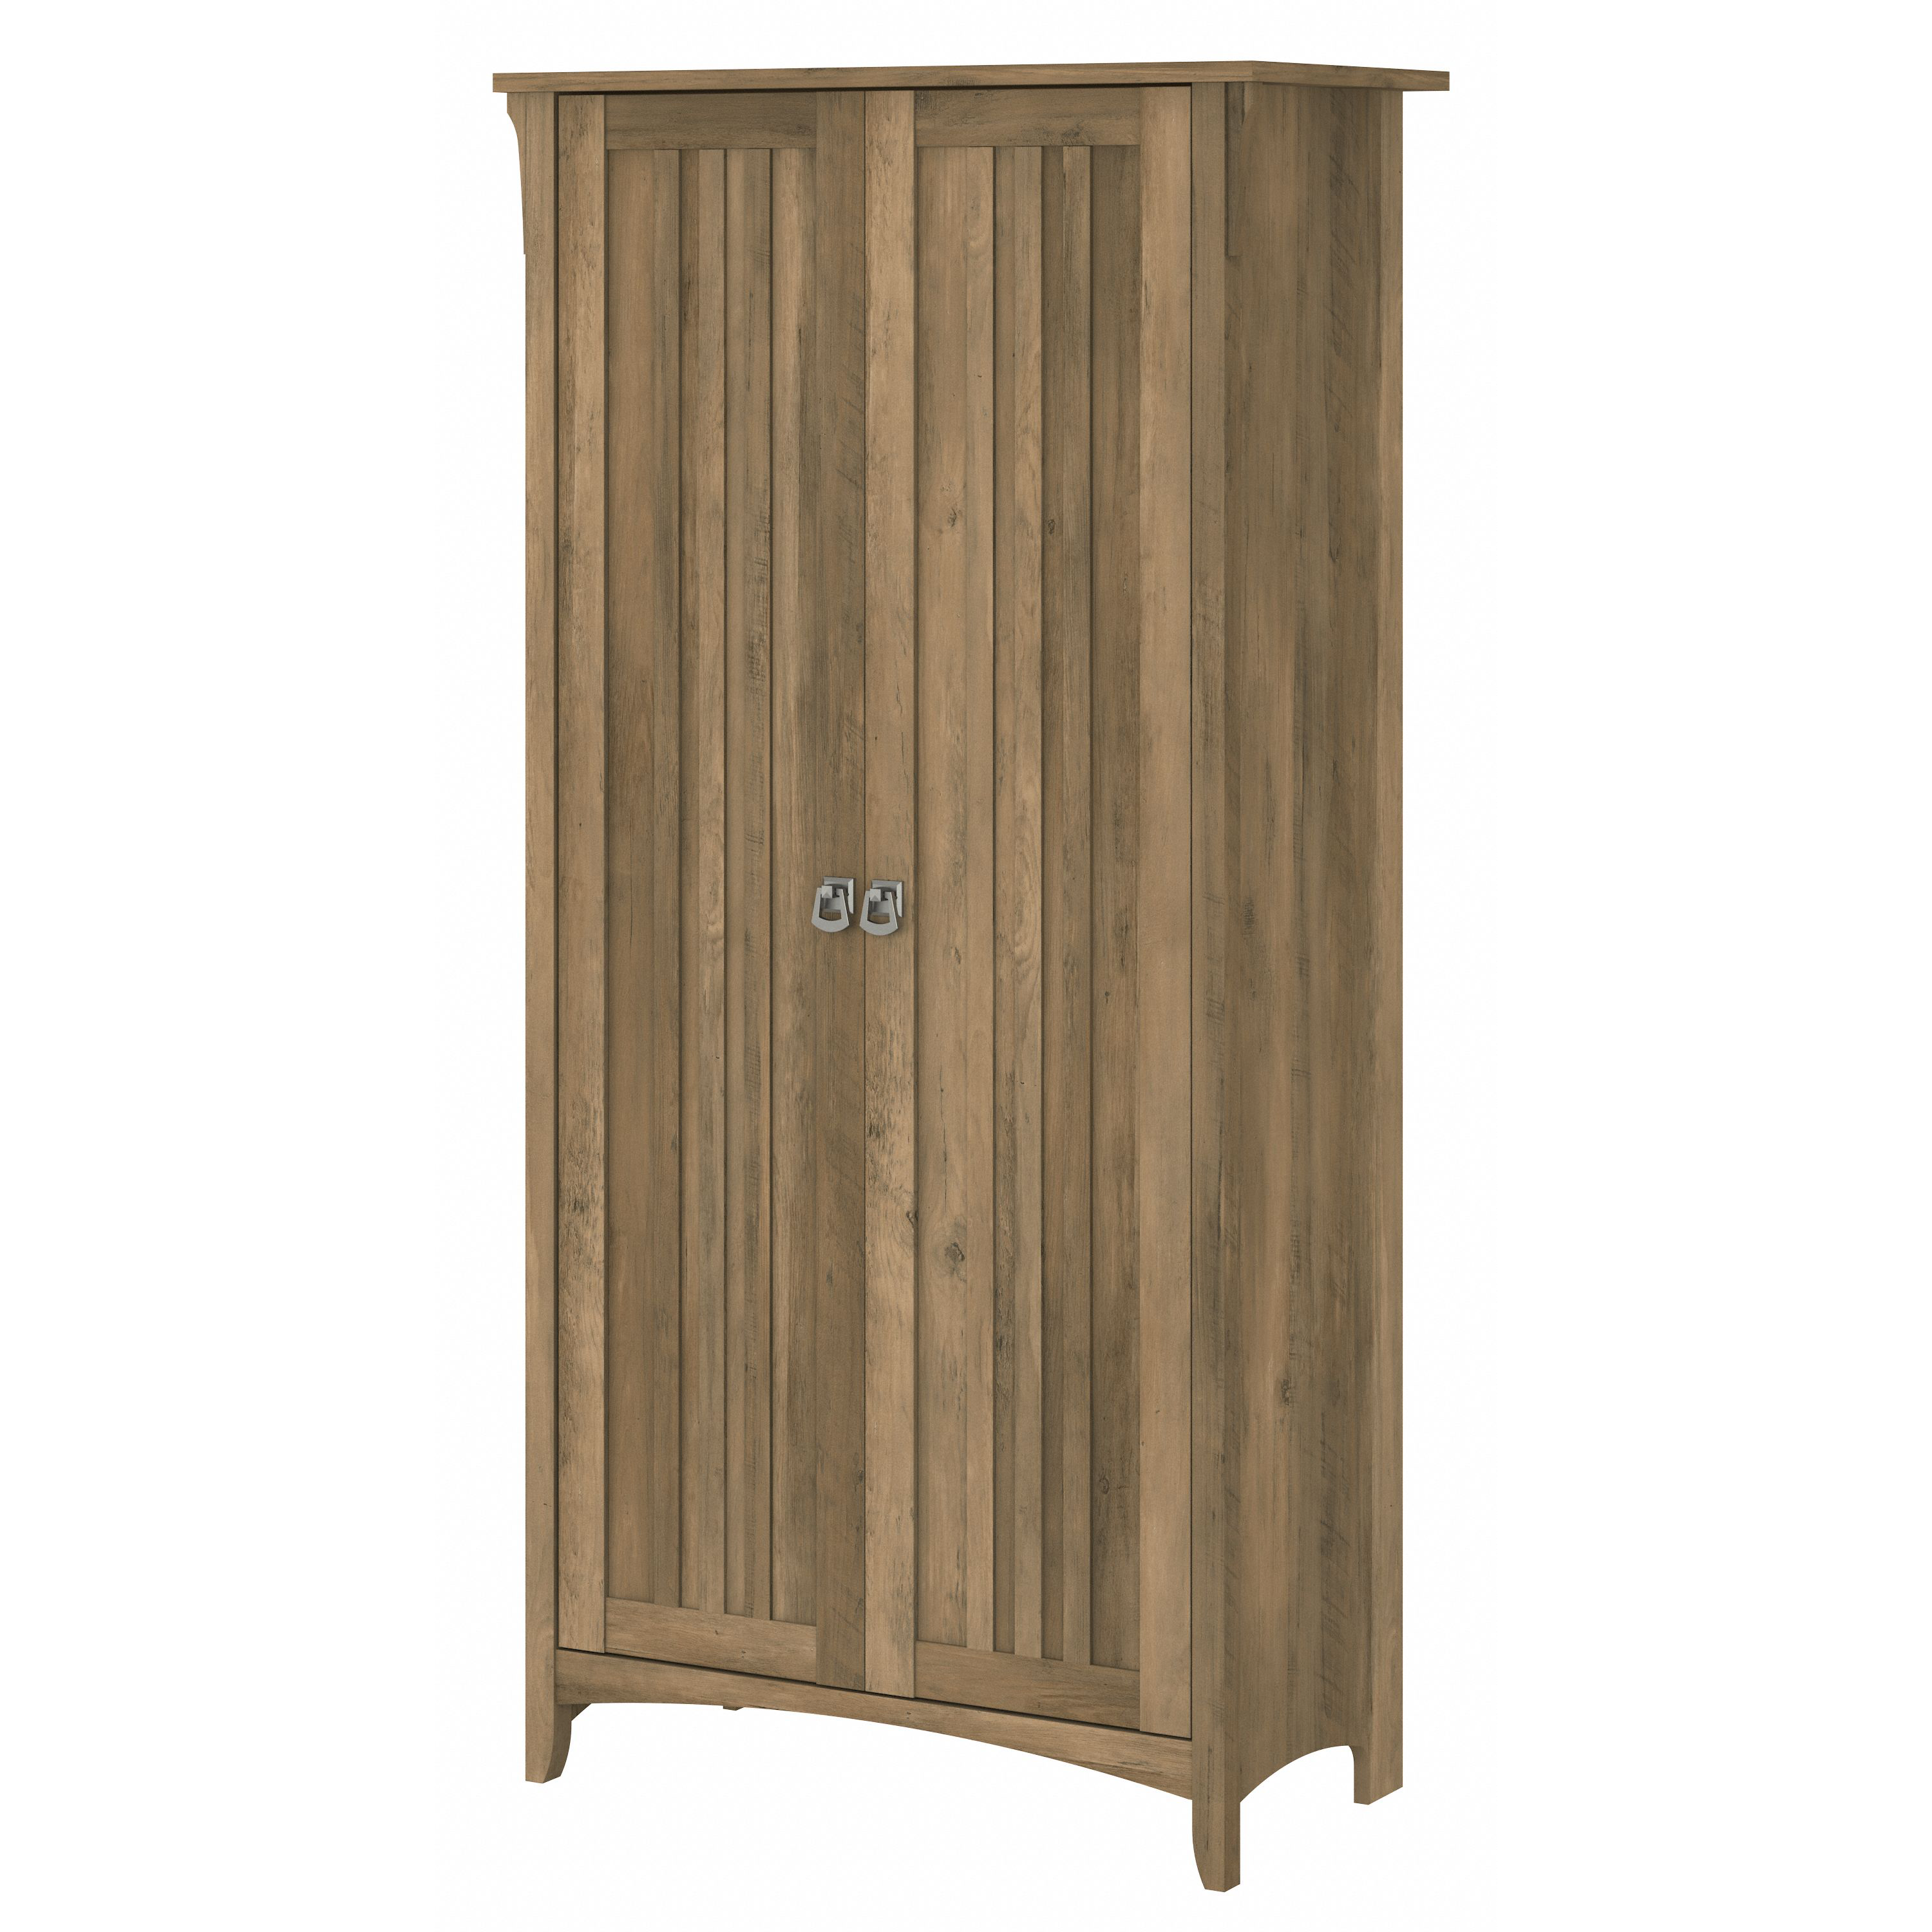 Shop Bush Furniture Salinas Tall Storage Cabinet with Doors 02 SAS332RCP-03 #color_reclaimed pine